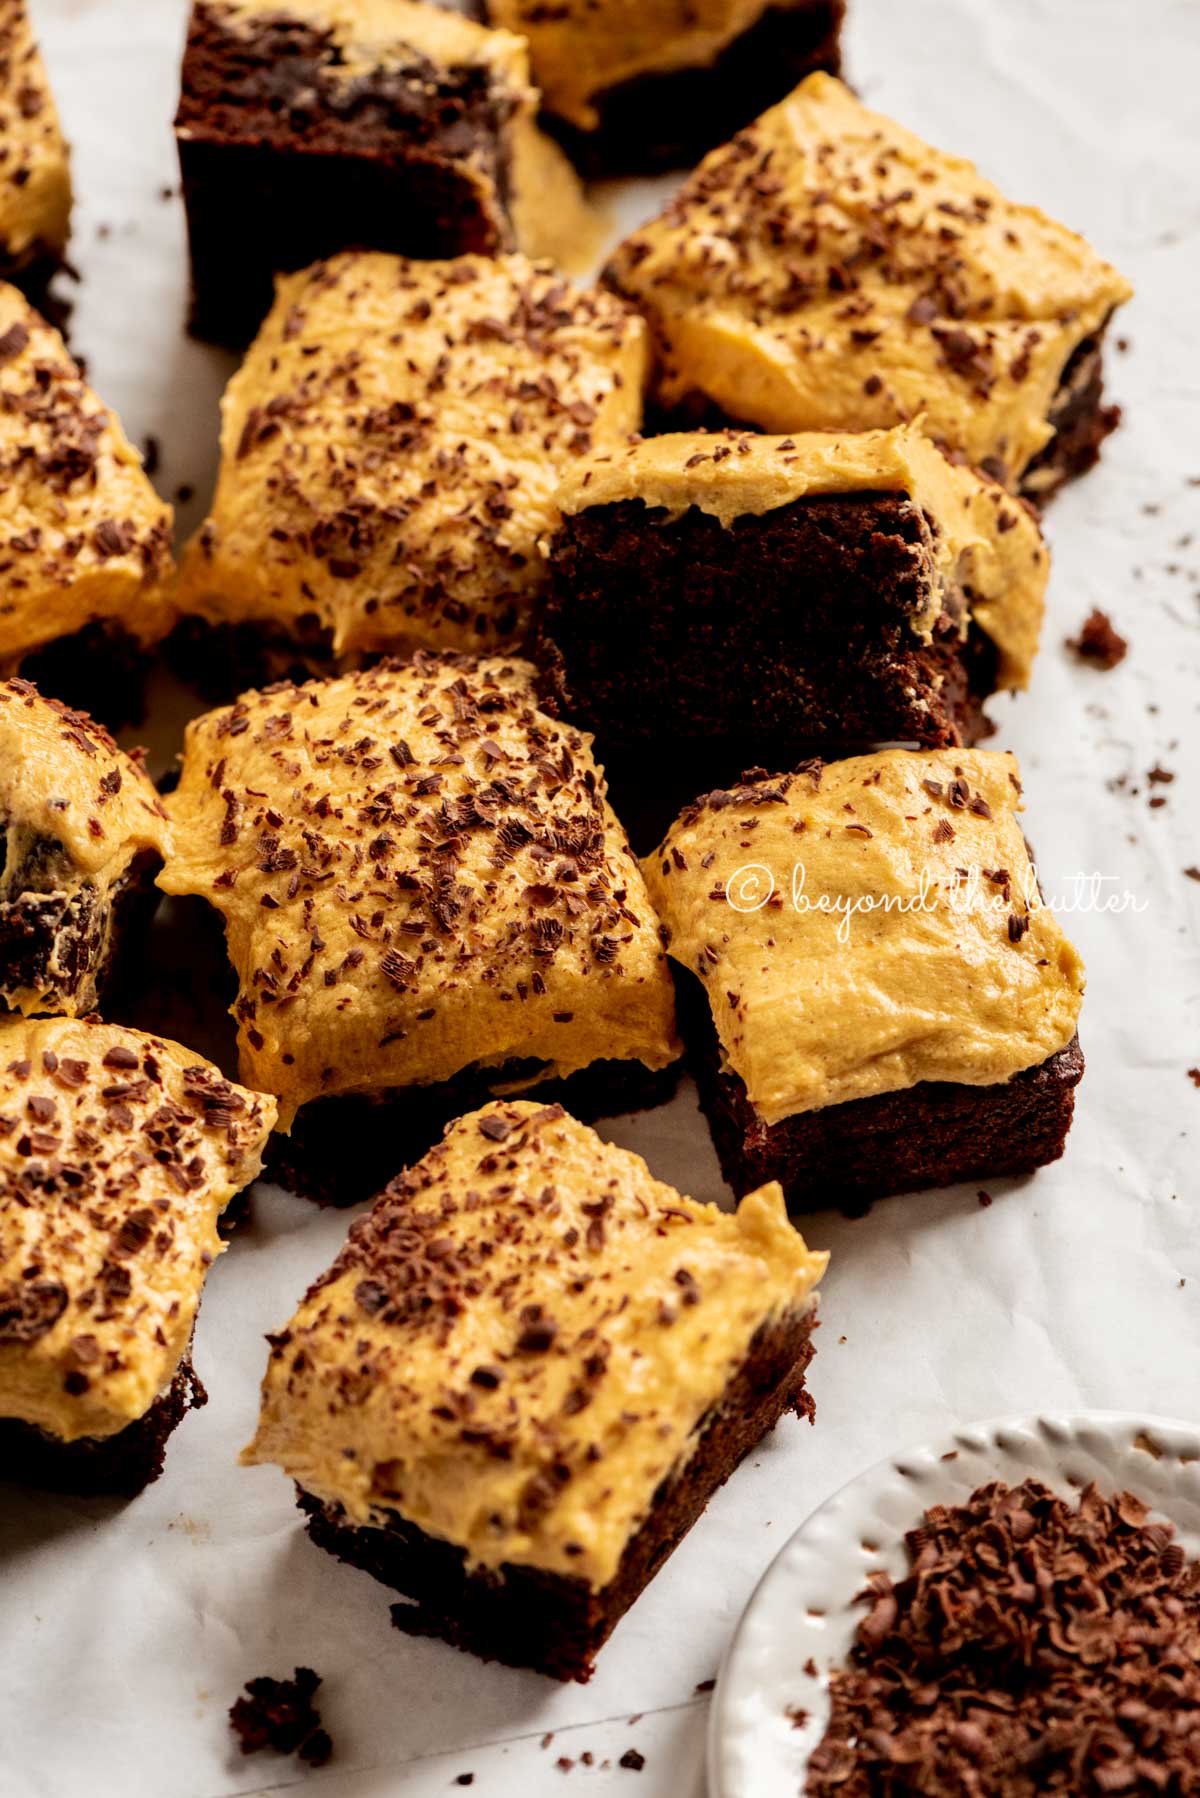 pumpkin frosted brownies randomly placed on parchment paper with a side bowl of chocolate shavings | All Images © Beyond the Butter™